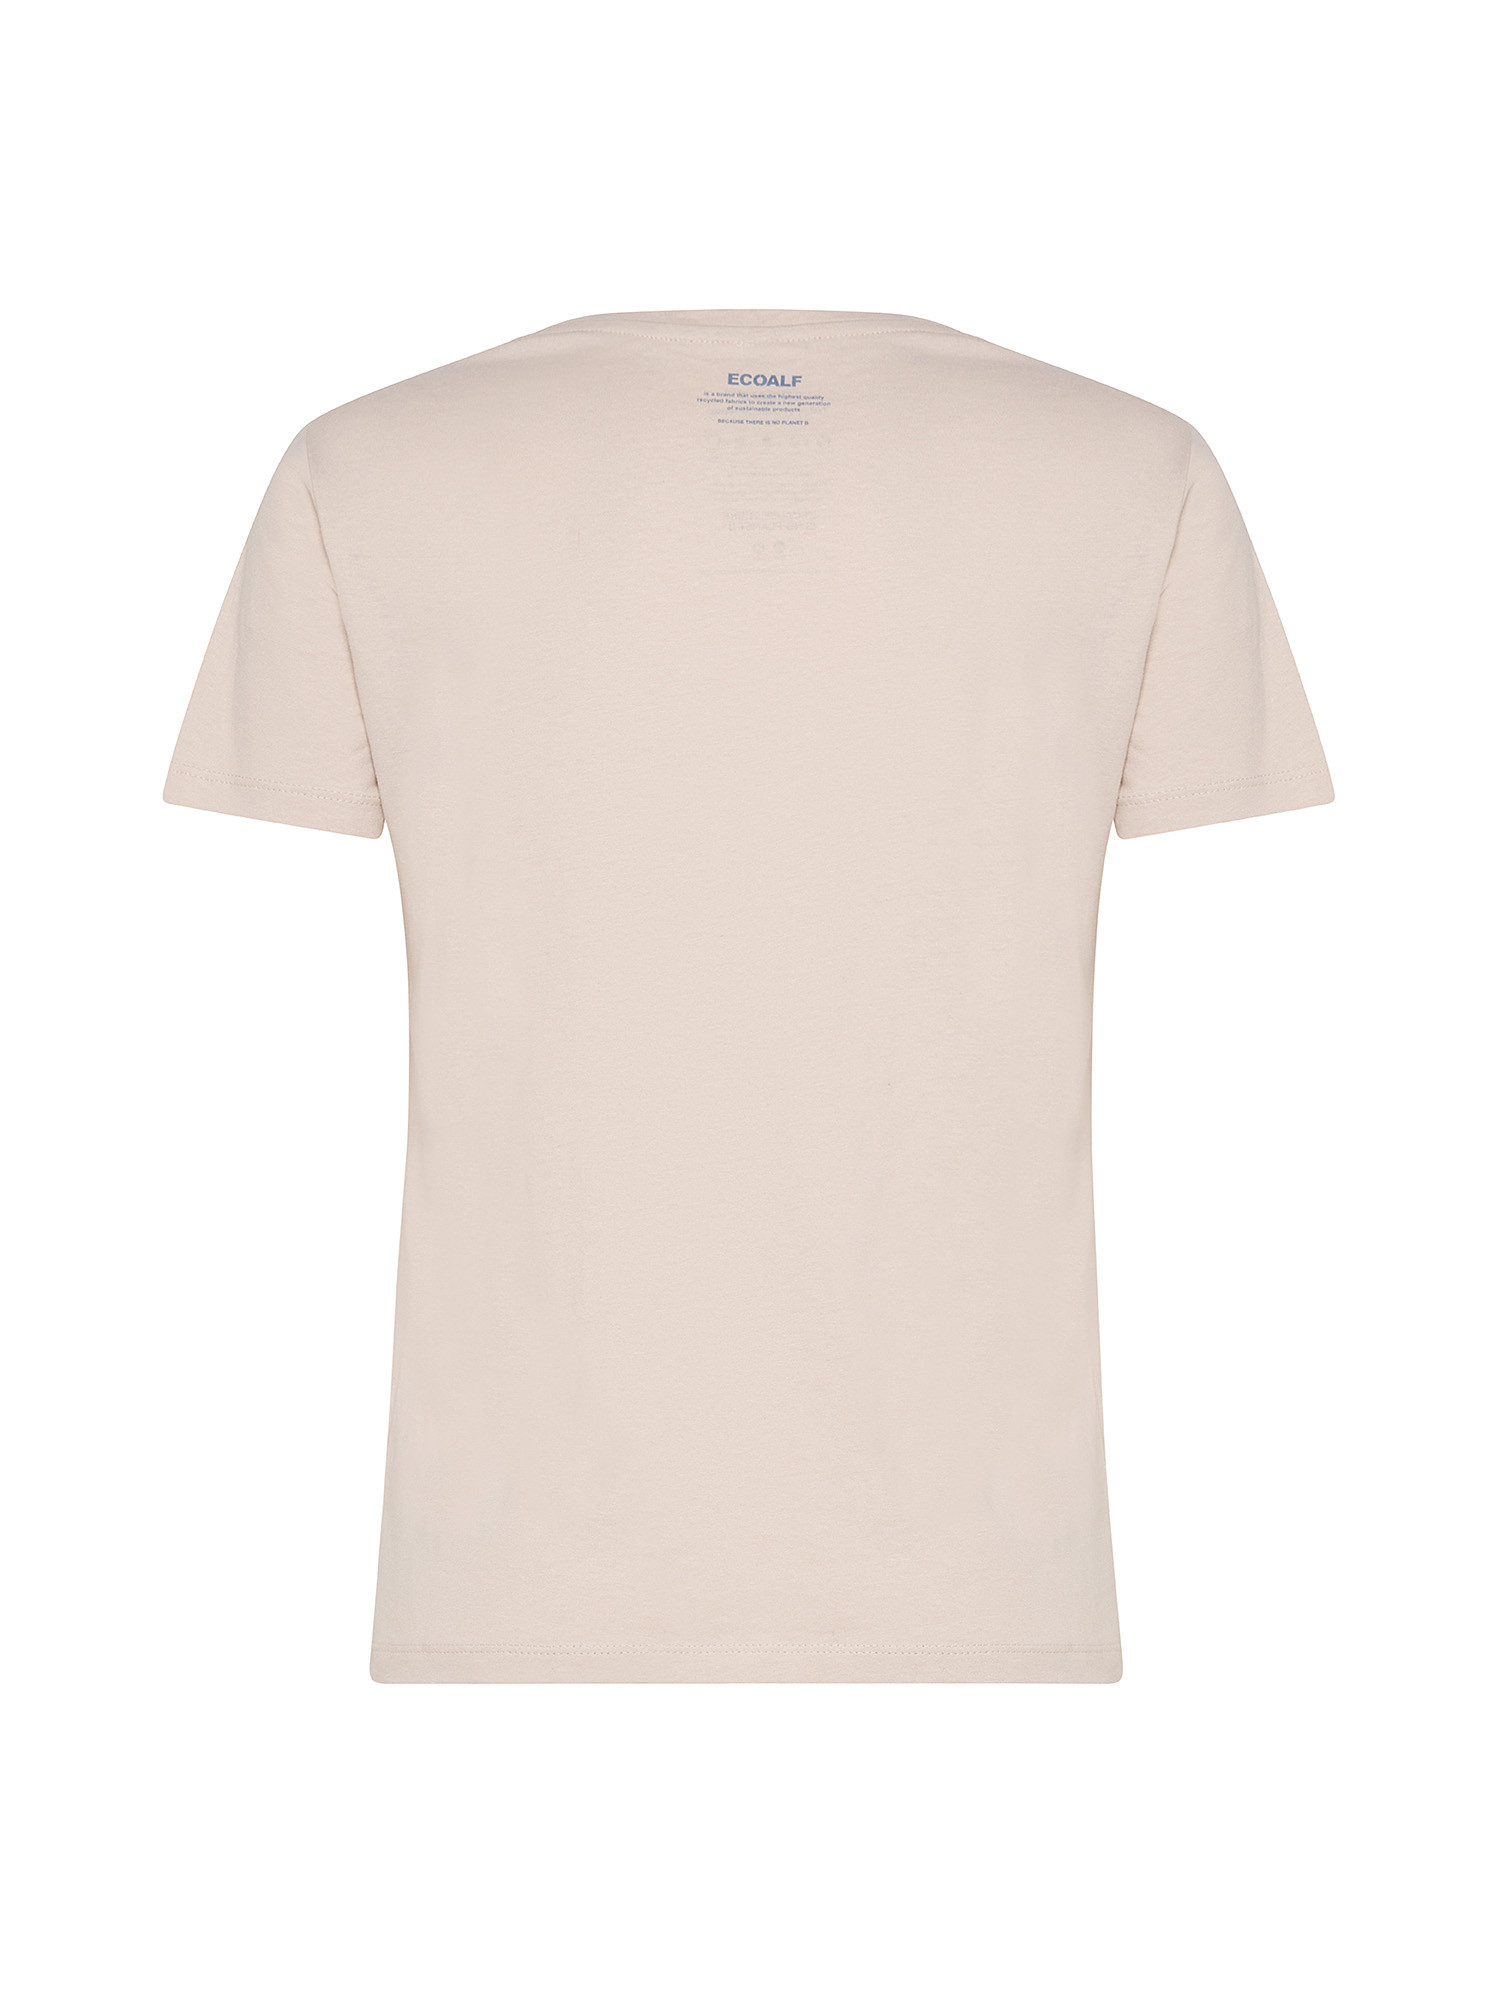 Ecoalf - Stay T-shirt with print, Light Beige, large image number 1